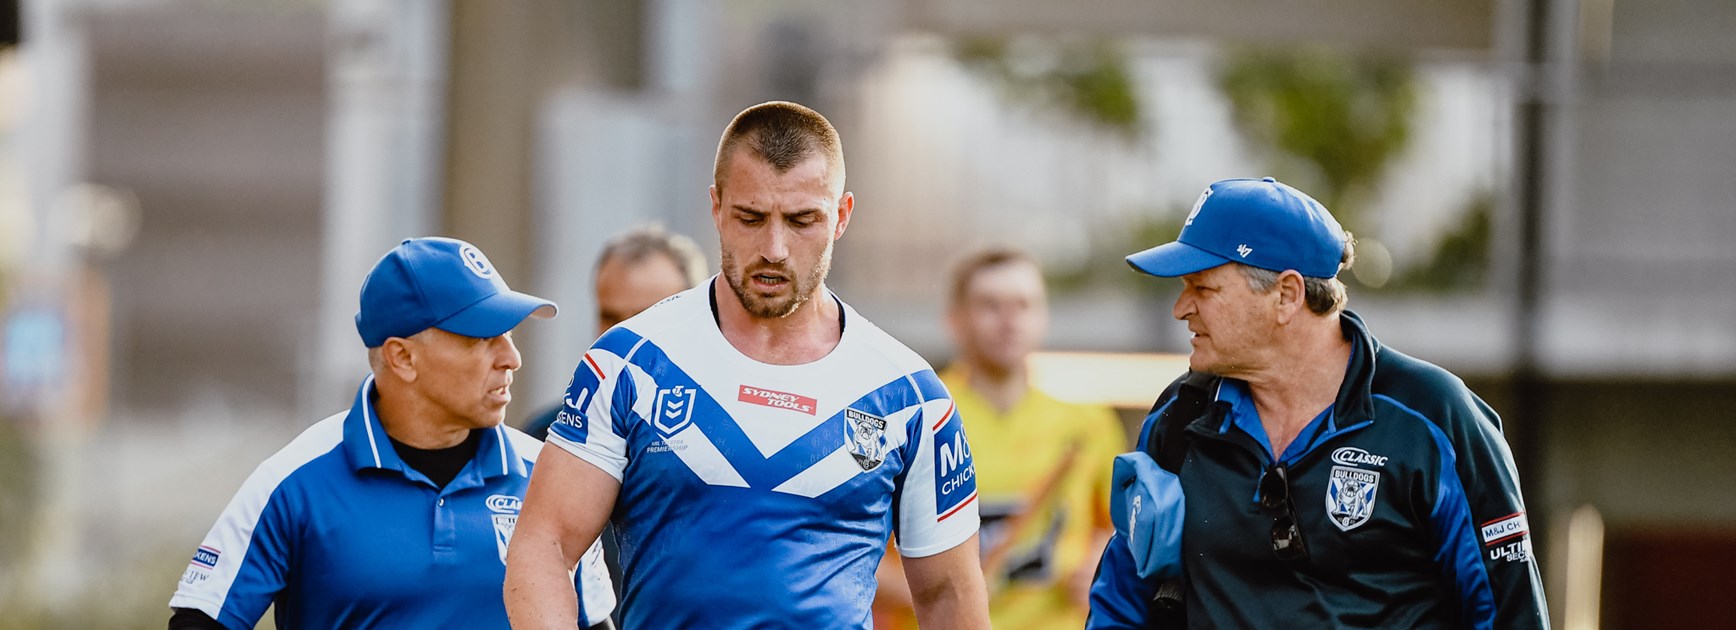 Injury update: Foran cleared on any damage